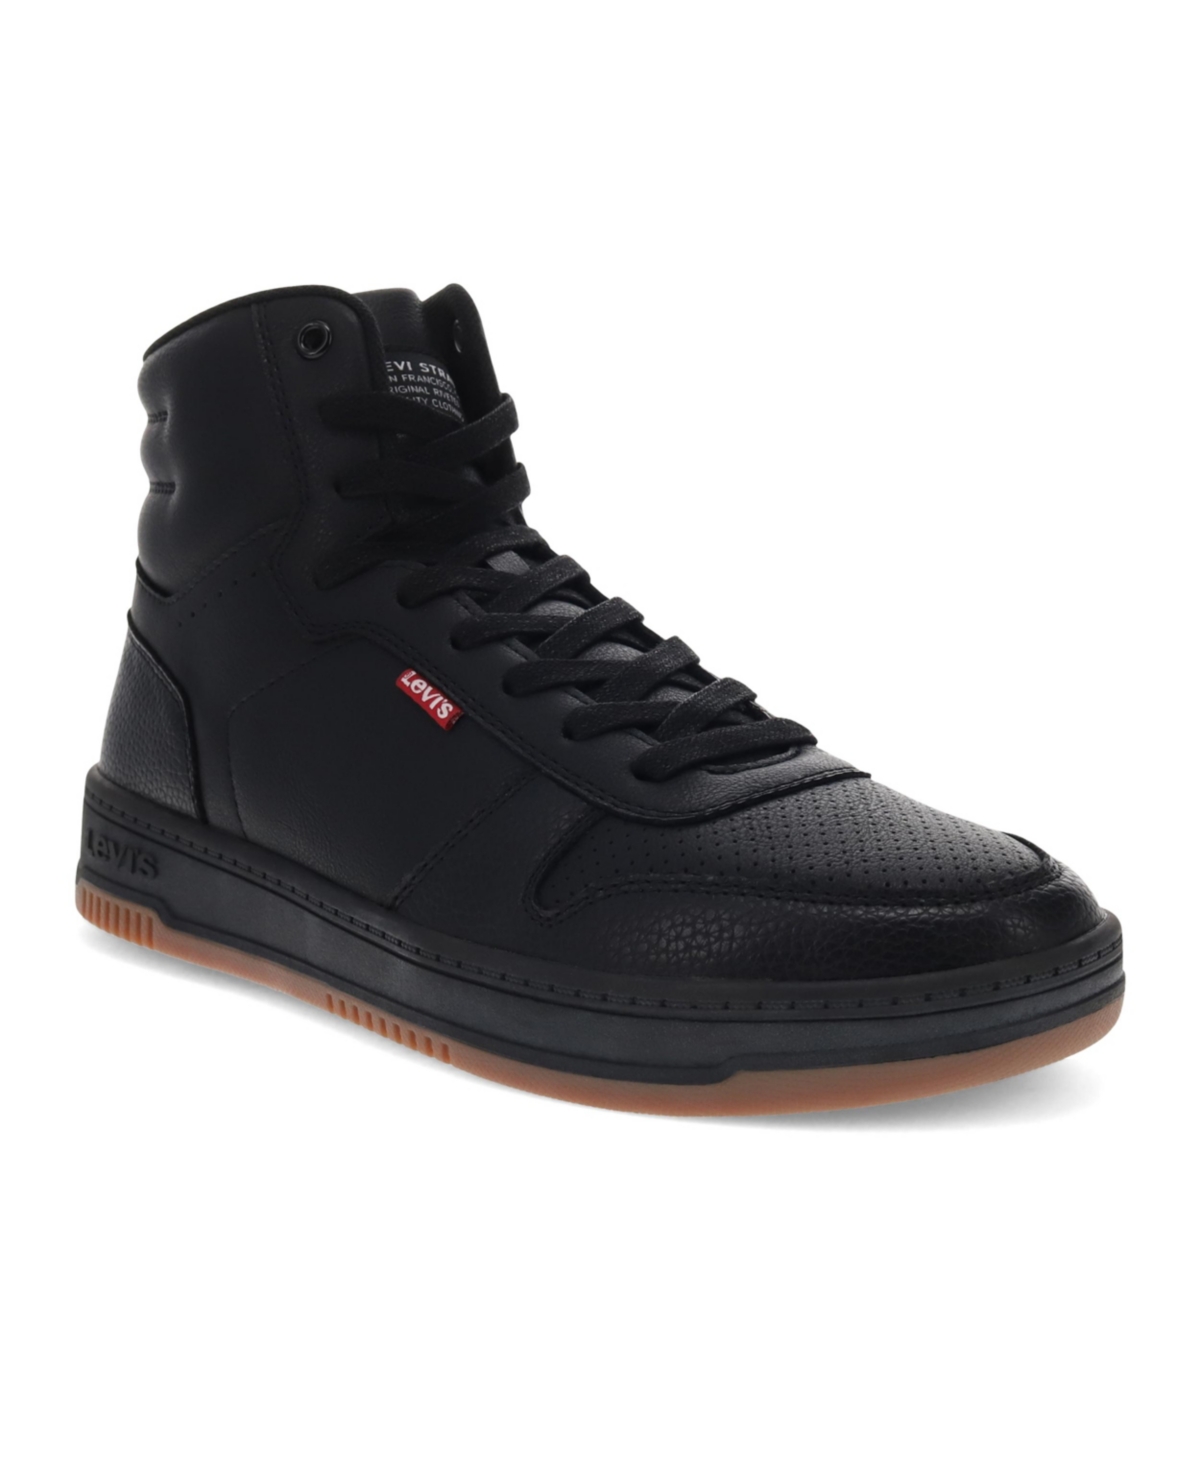 Men's Drive High Top Faux-Leather Lace-Up Sneakers - Black, Gum